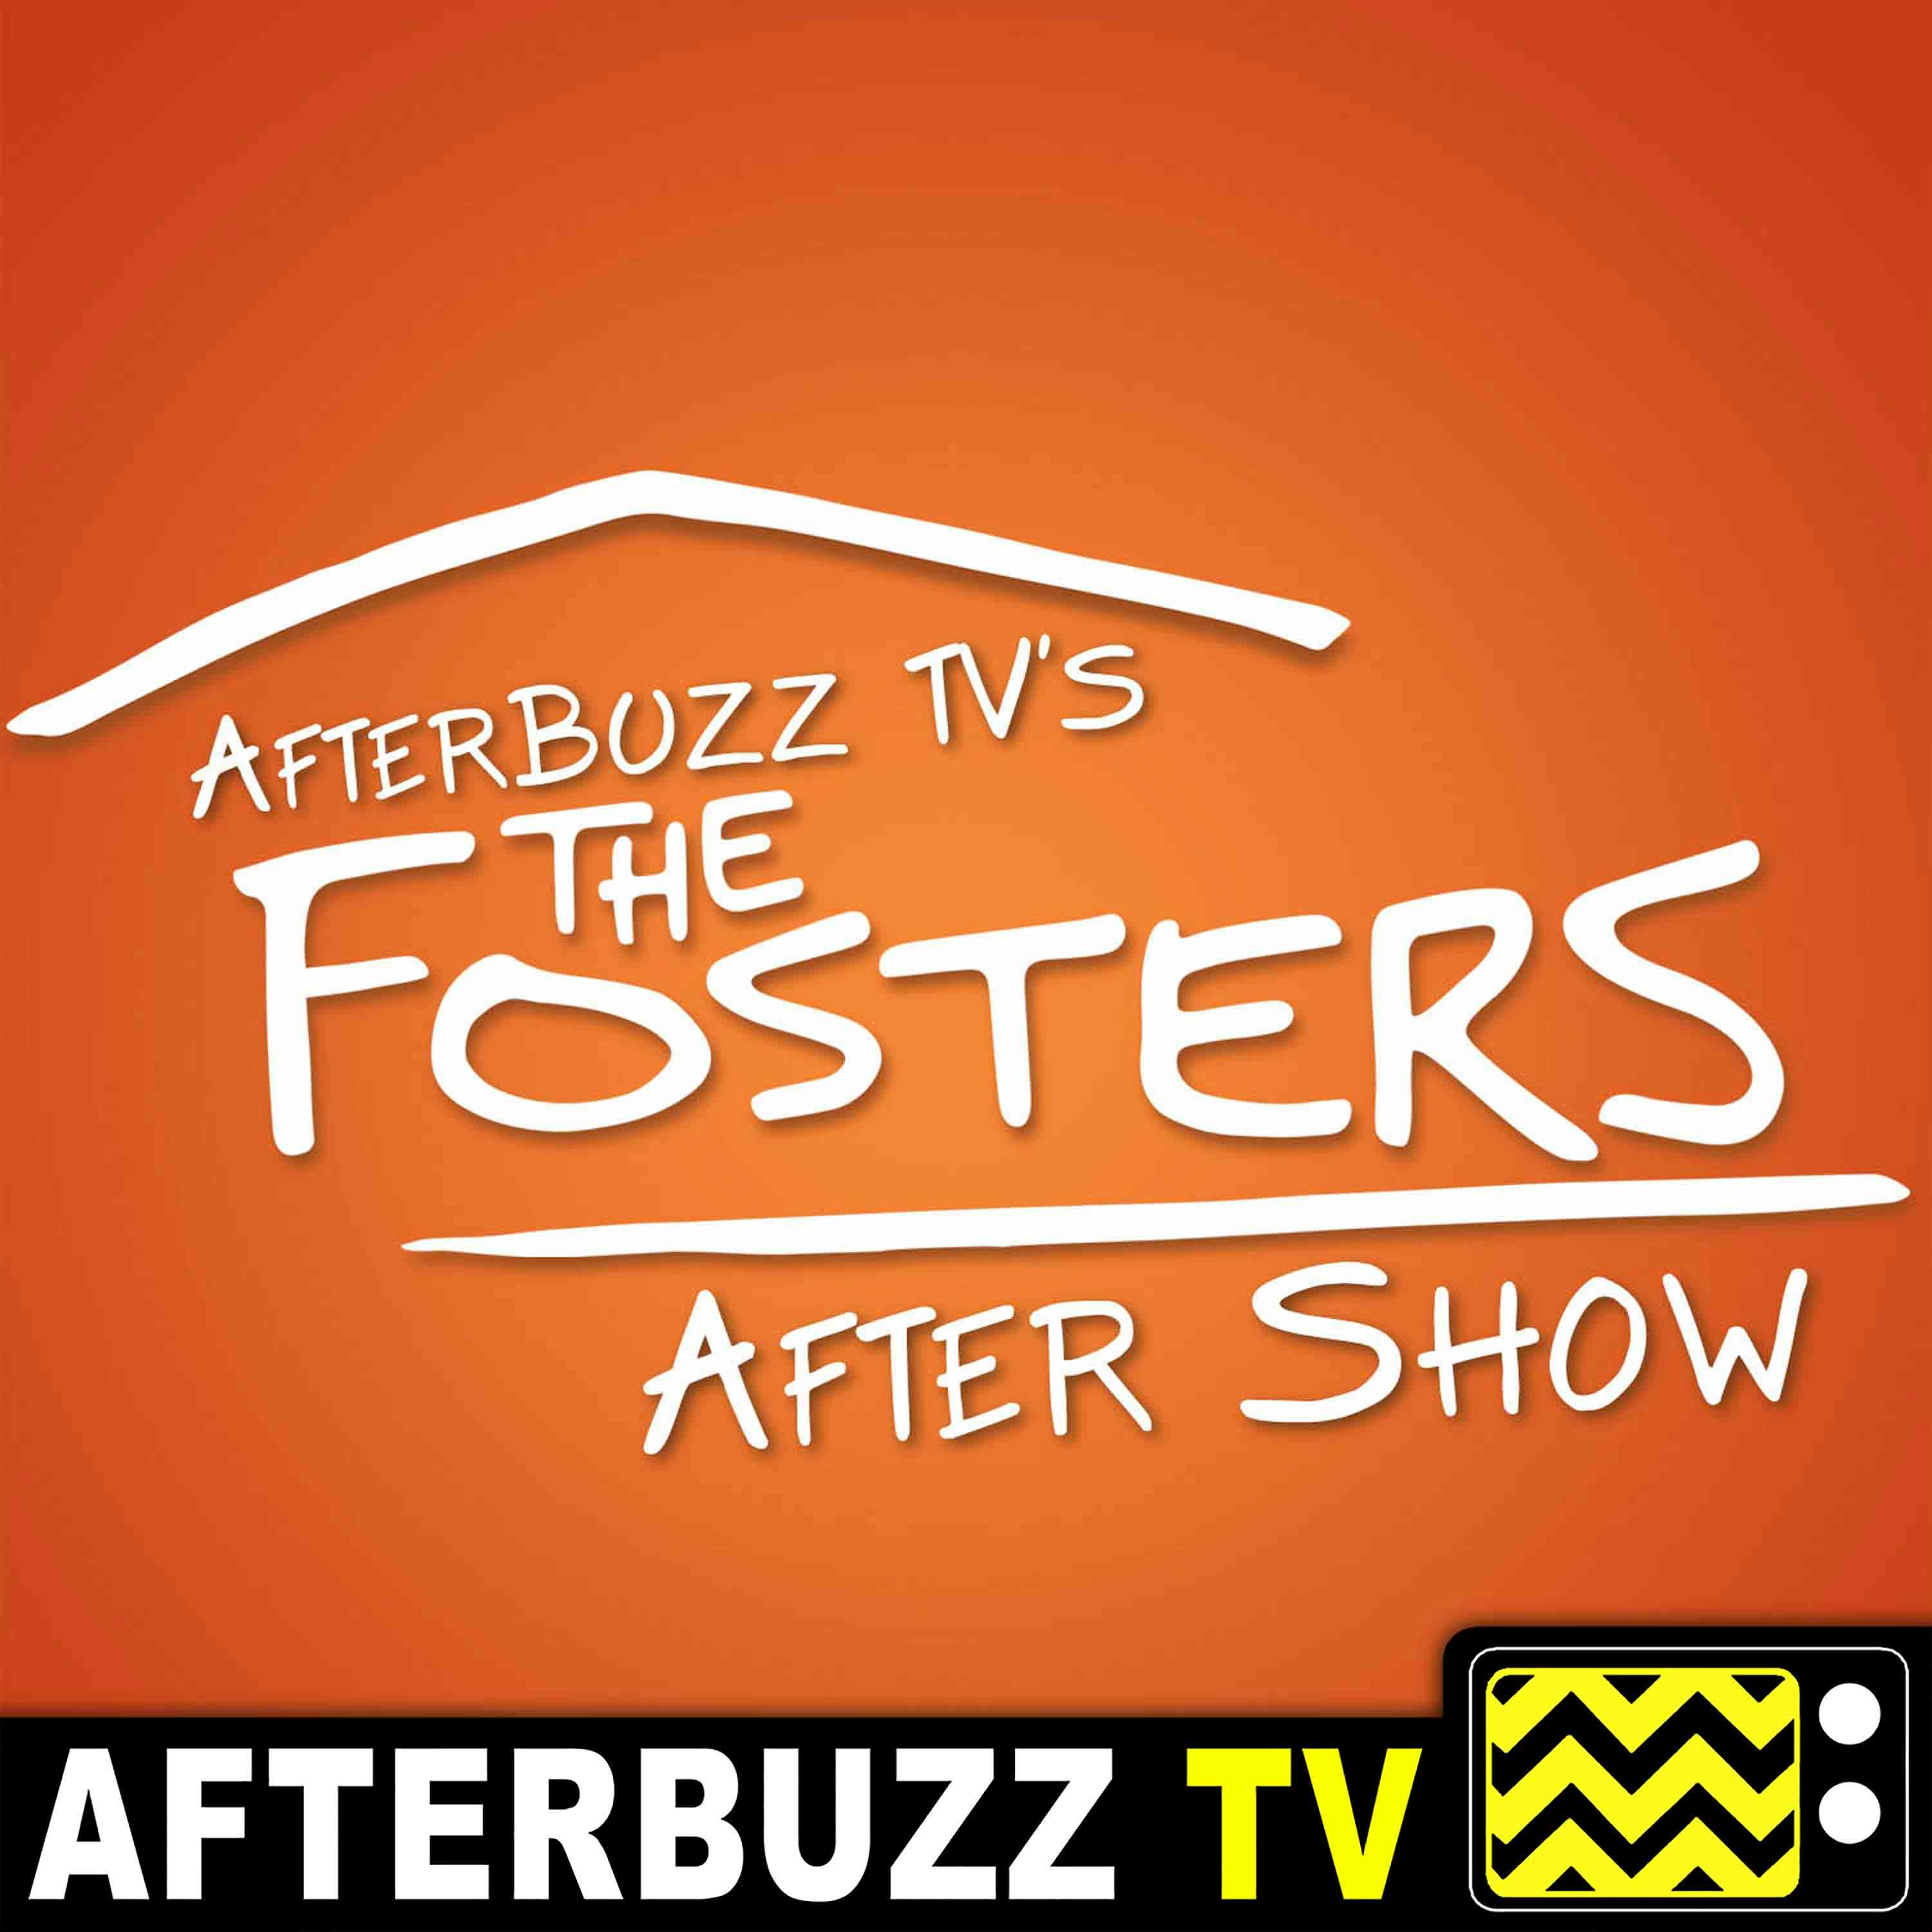 The Fosters S:5 | Tom Williamson Guests On Prom E:9 | AfterBuzz TV AfterShow